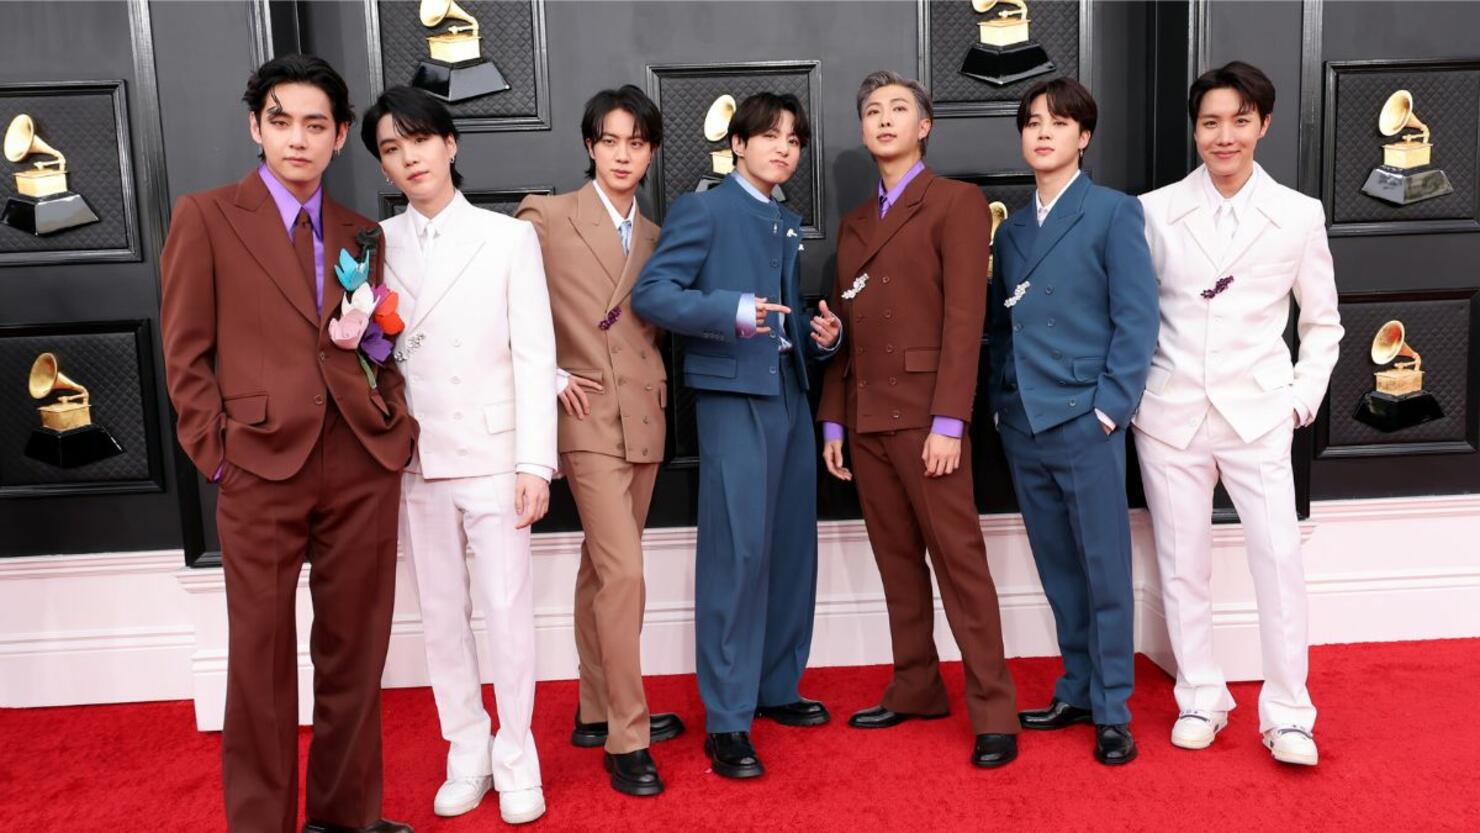 Watch BTS's Performance at the 2022 Grammys